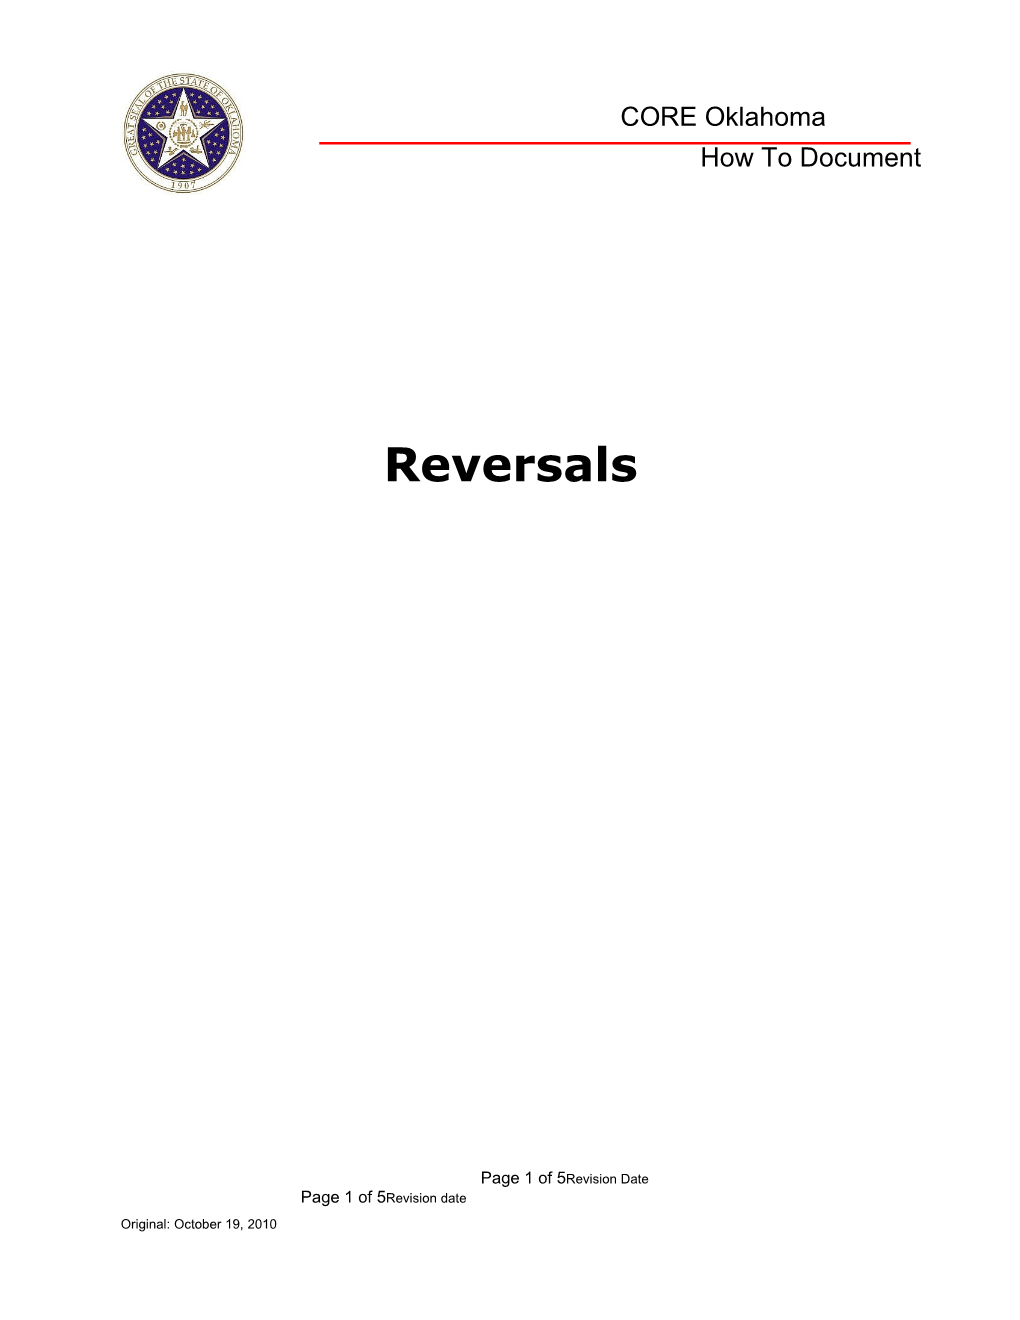 CORE How To: Reversals